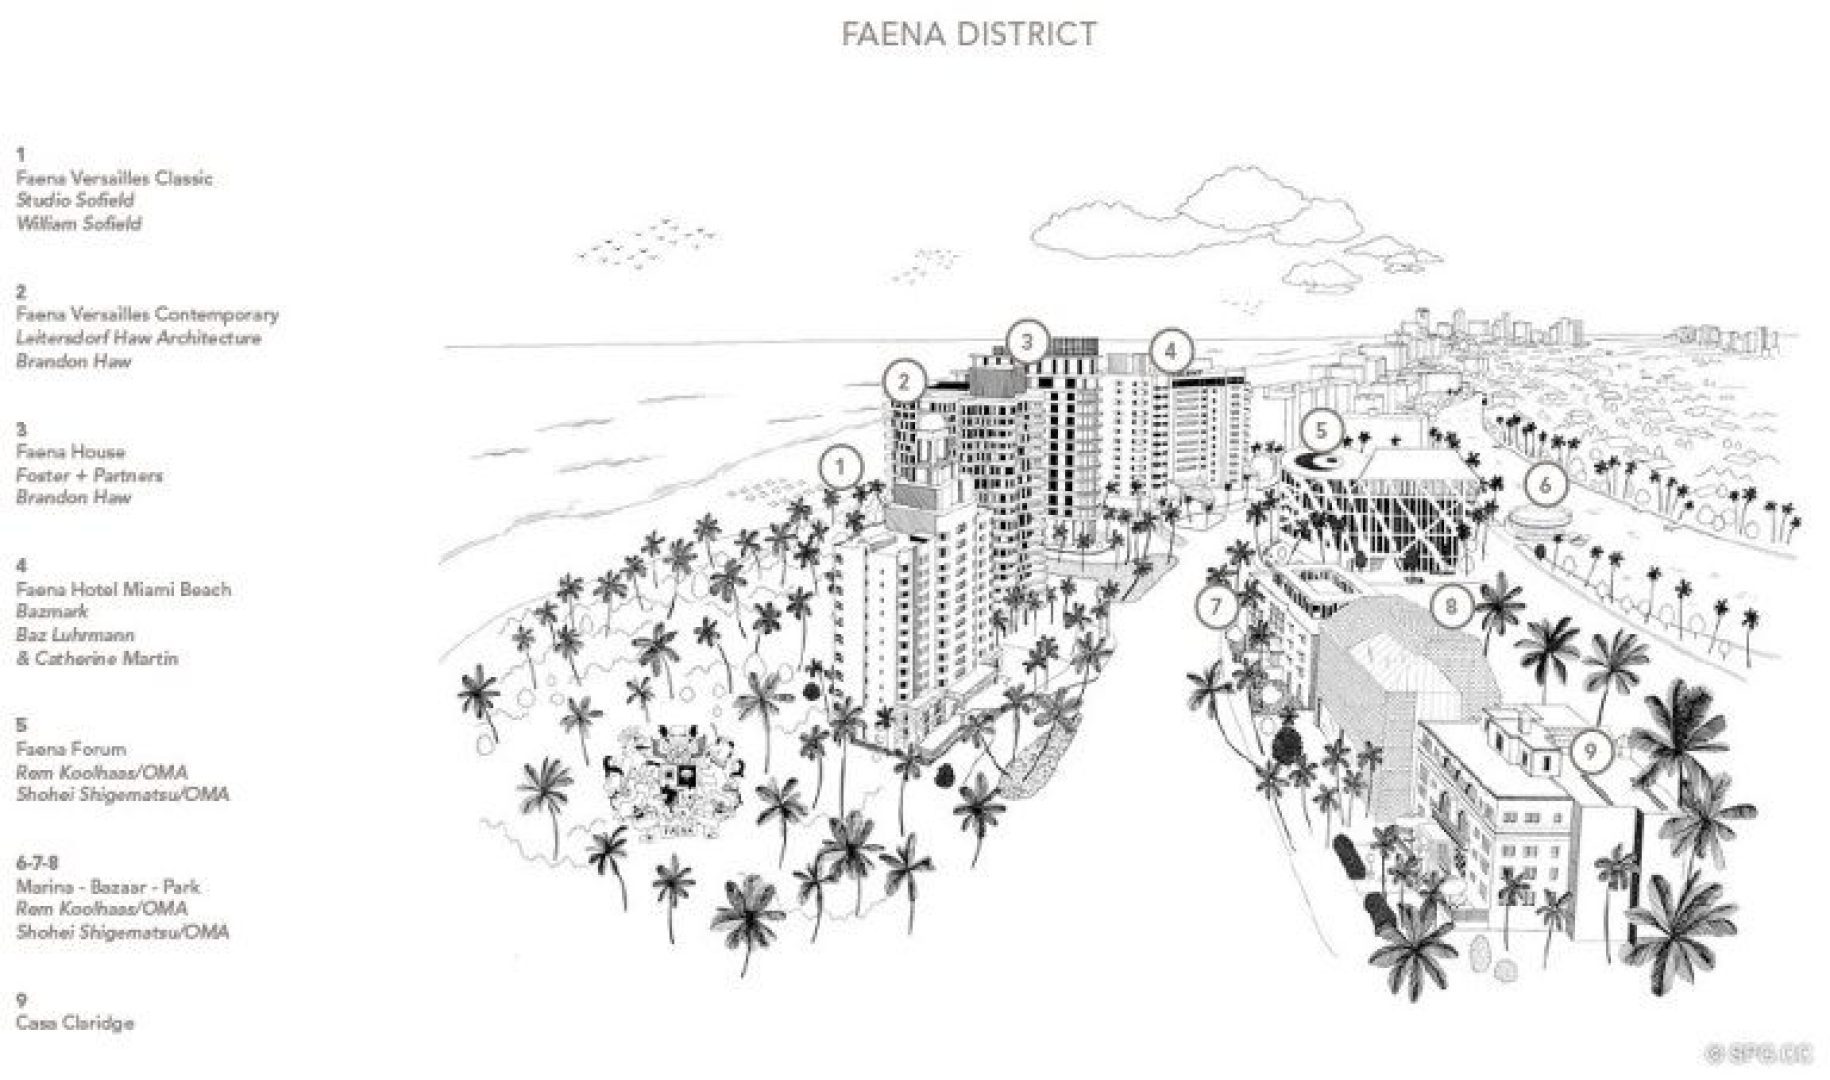 Outline of Faena District and Faena Versailles Classic, Luxury Oceanfront Condos in Miami Beach, Florida 33140